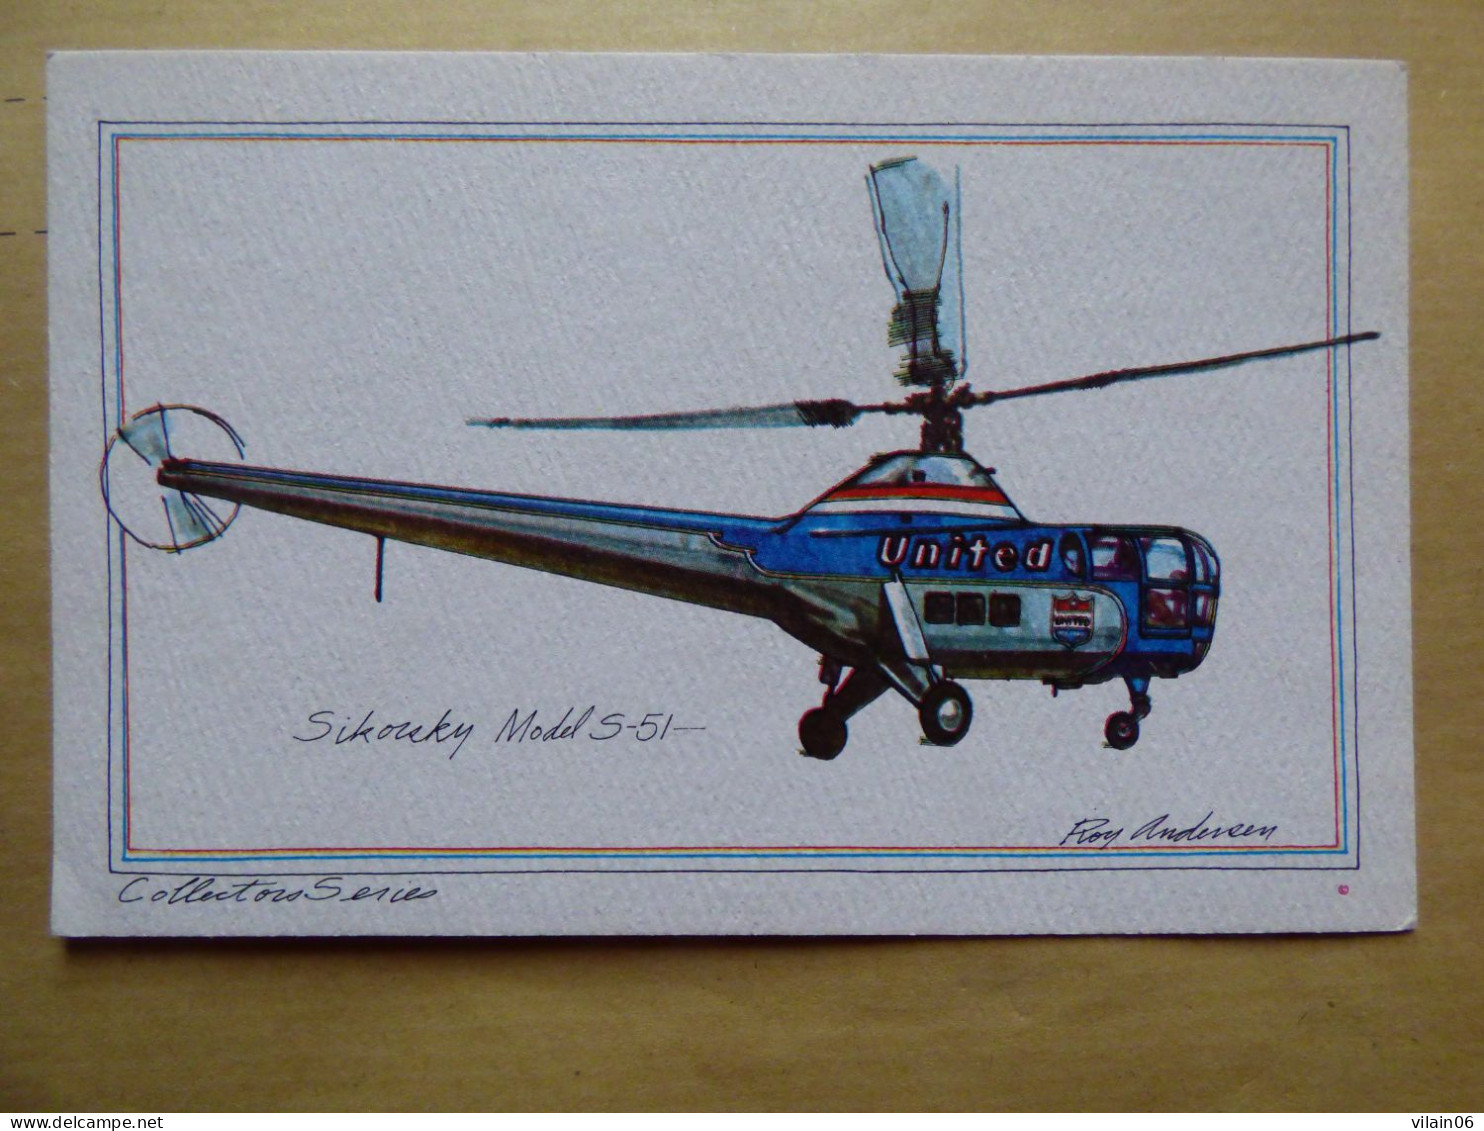 UNITED  SIKORSKY S-51  AIRLINES ISSUE / CARTE DE COMPAGNIE - Helicopters